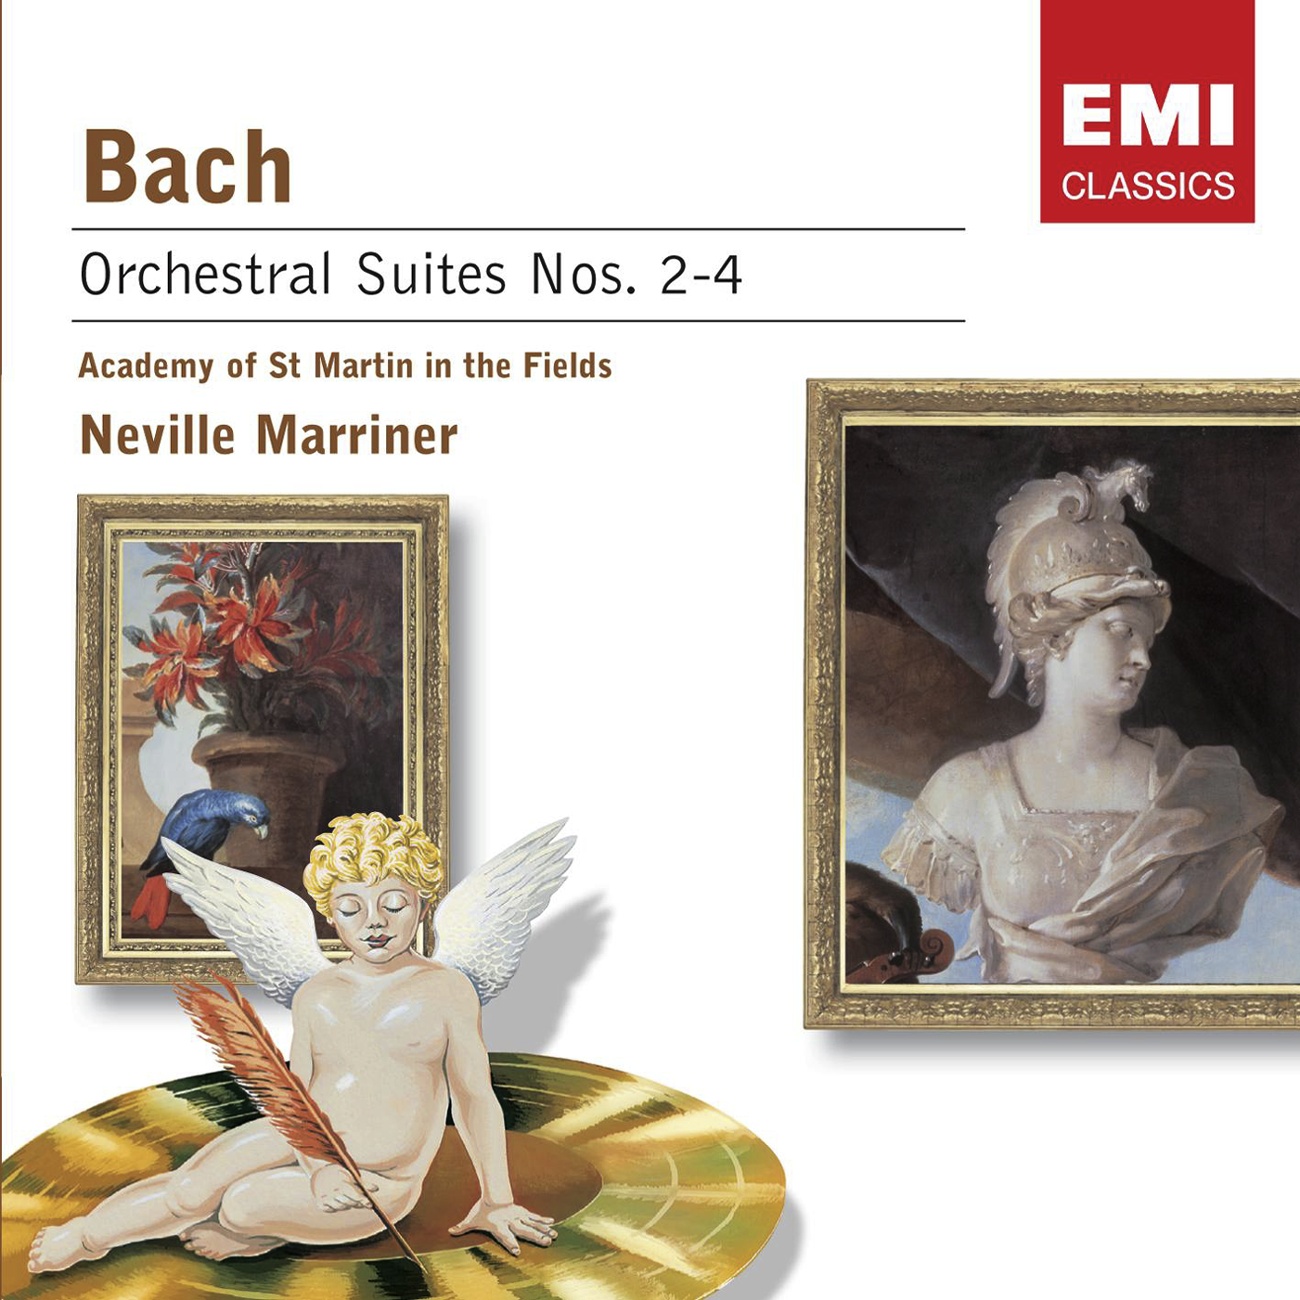 4 Orchestral Suites, BWV 1066-9, Suite No.3 in D Major, BWV 1068 (2 oboes, 3 trumpets, strings and timpani): Gigue